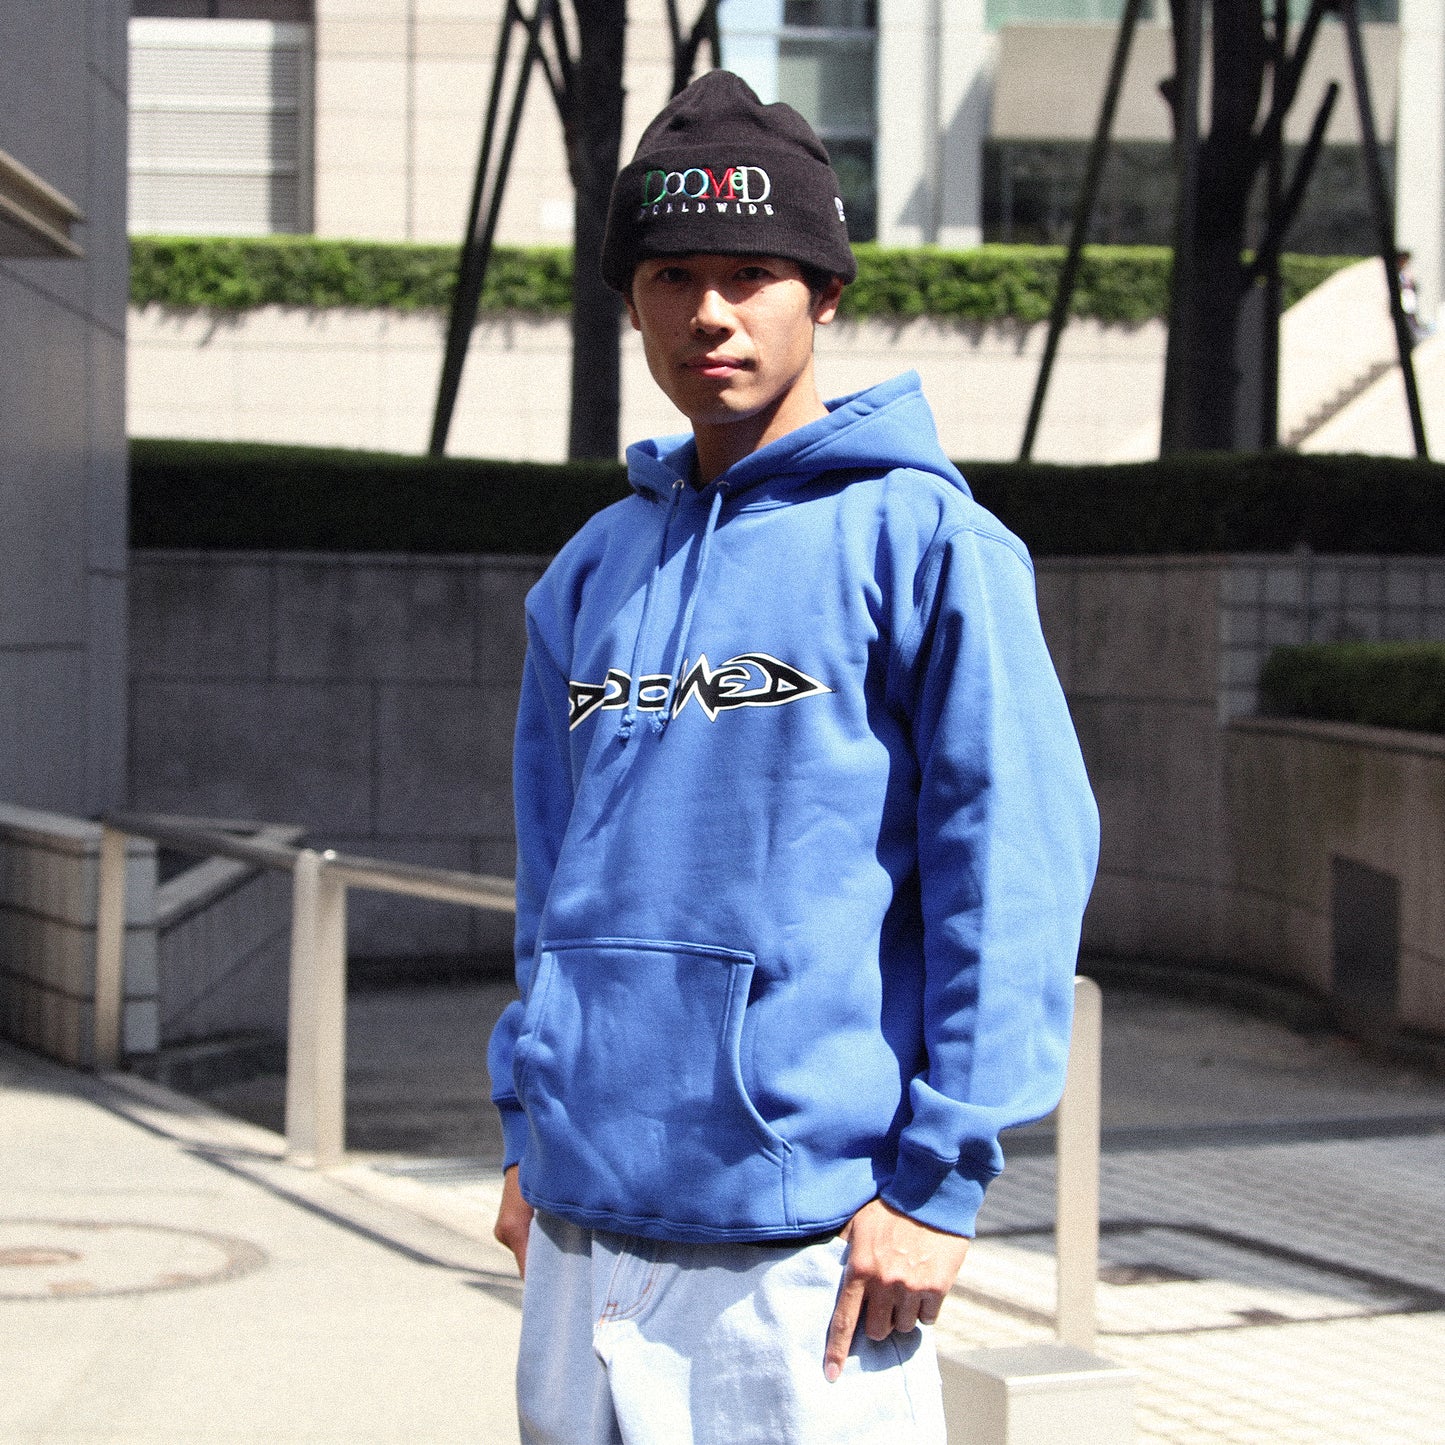 DOOMED - High Point Hoodie/Royal Blue